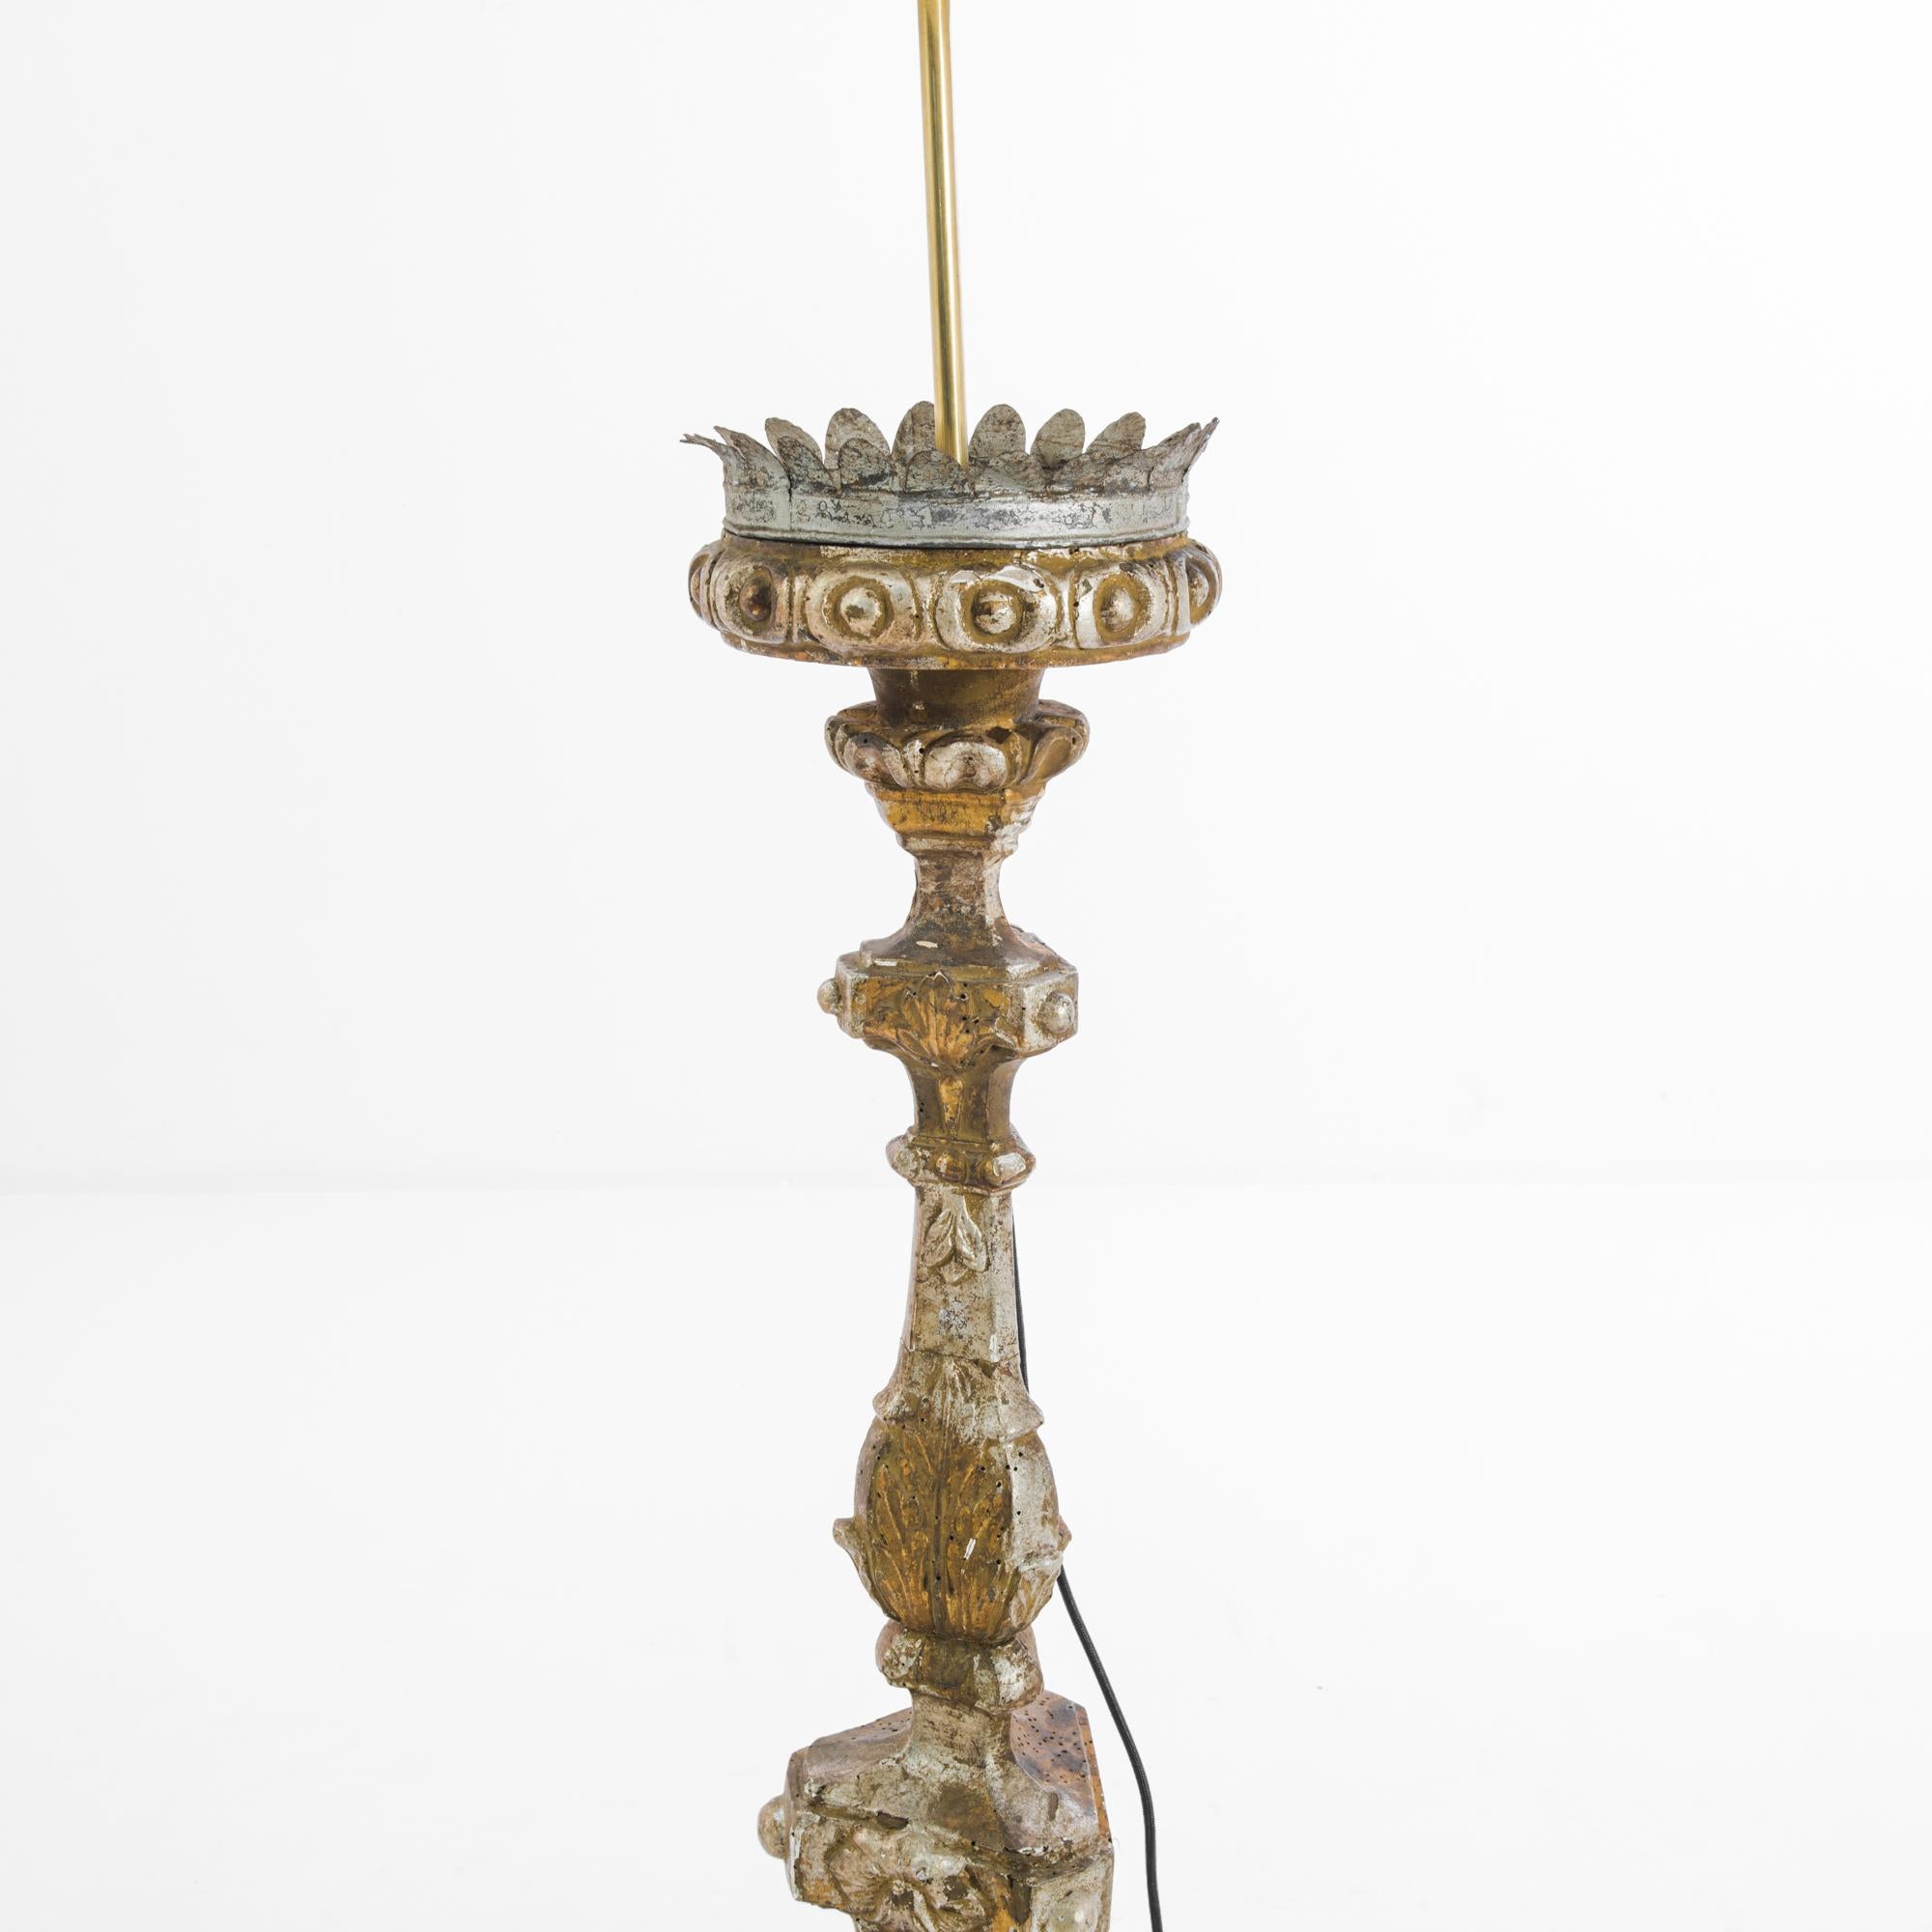 Made in France, circa 1780, this wooden floor lamp lends an old-world charm with the ornate carvings, adorned with a metal border and polychrome color. Alongside carvings of flowers and leaves, the egg and dart ornamentation as well as the scroll